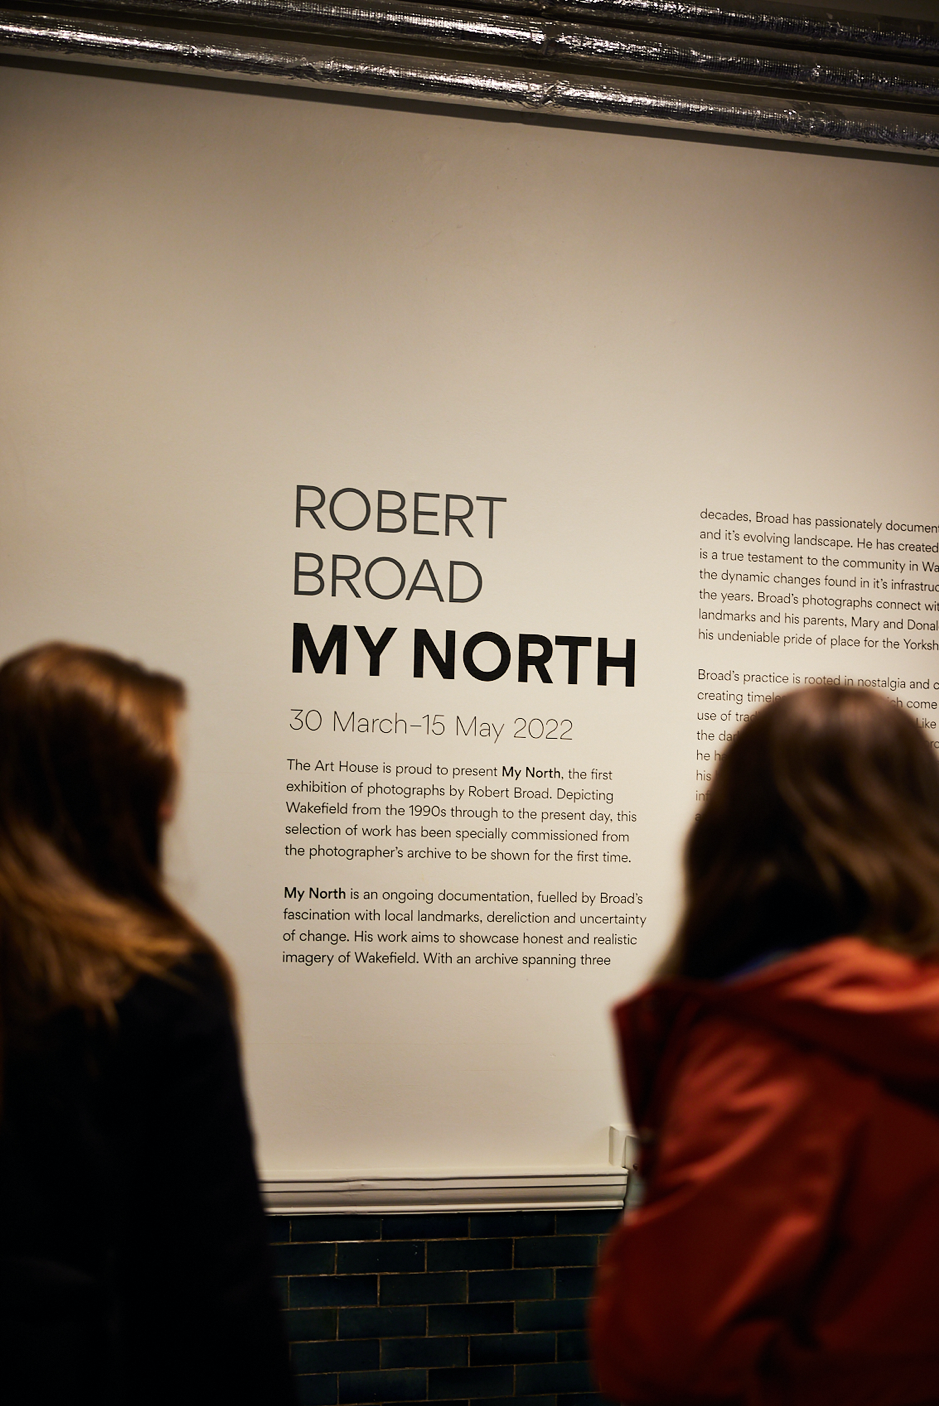 Robert Broad: My North opening at The Art House